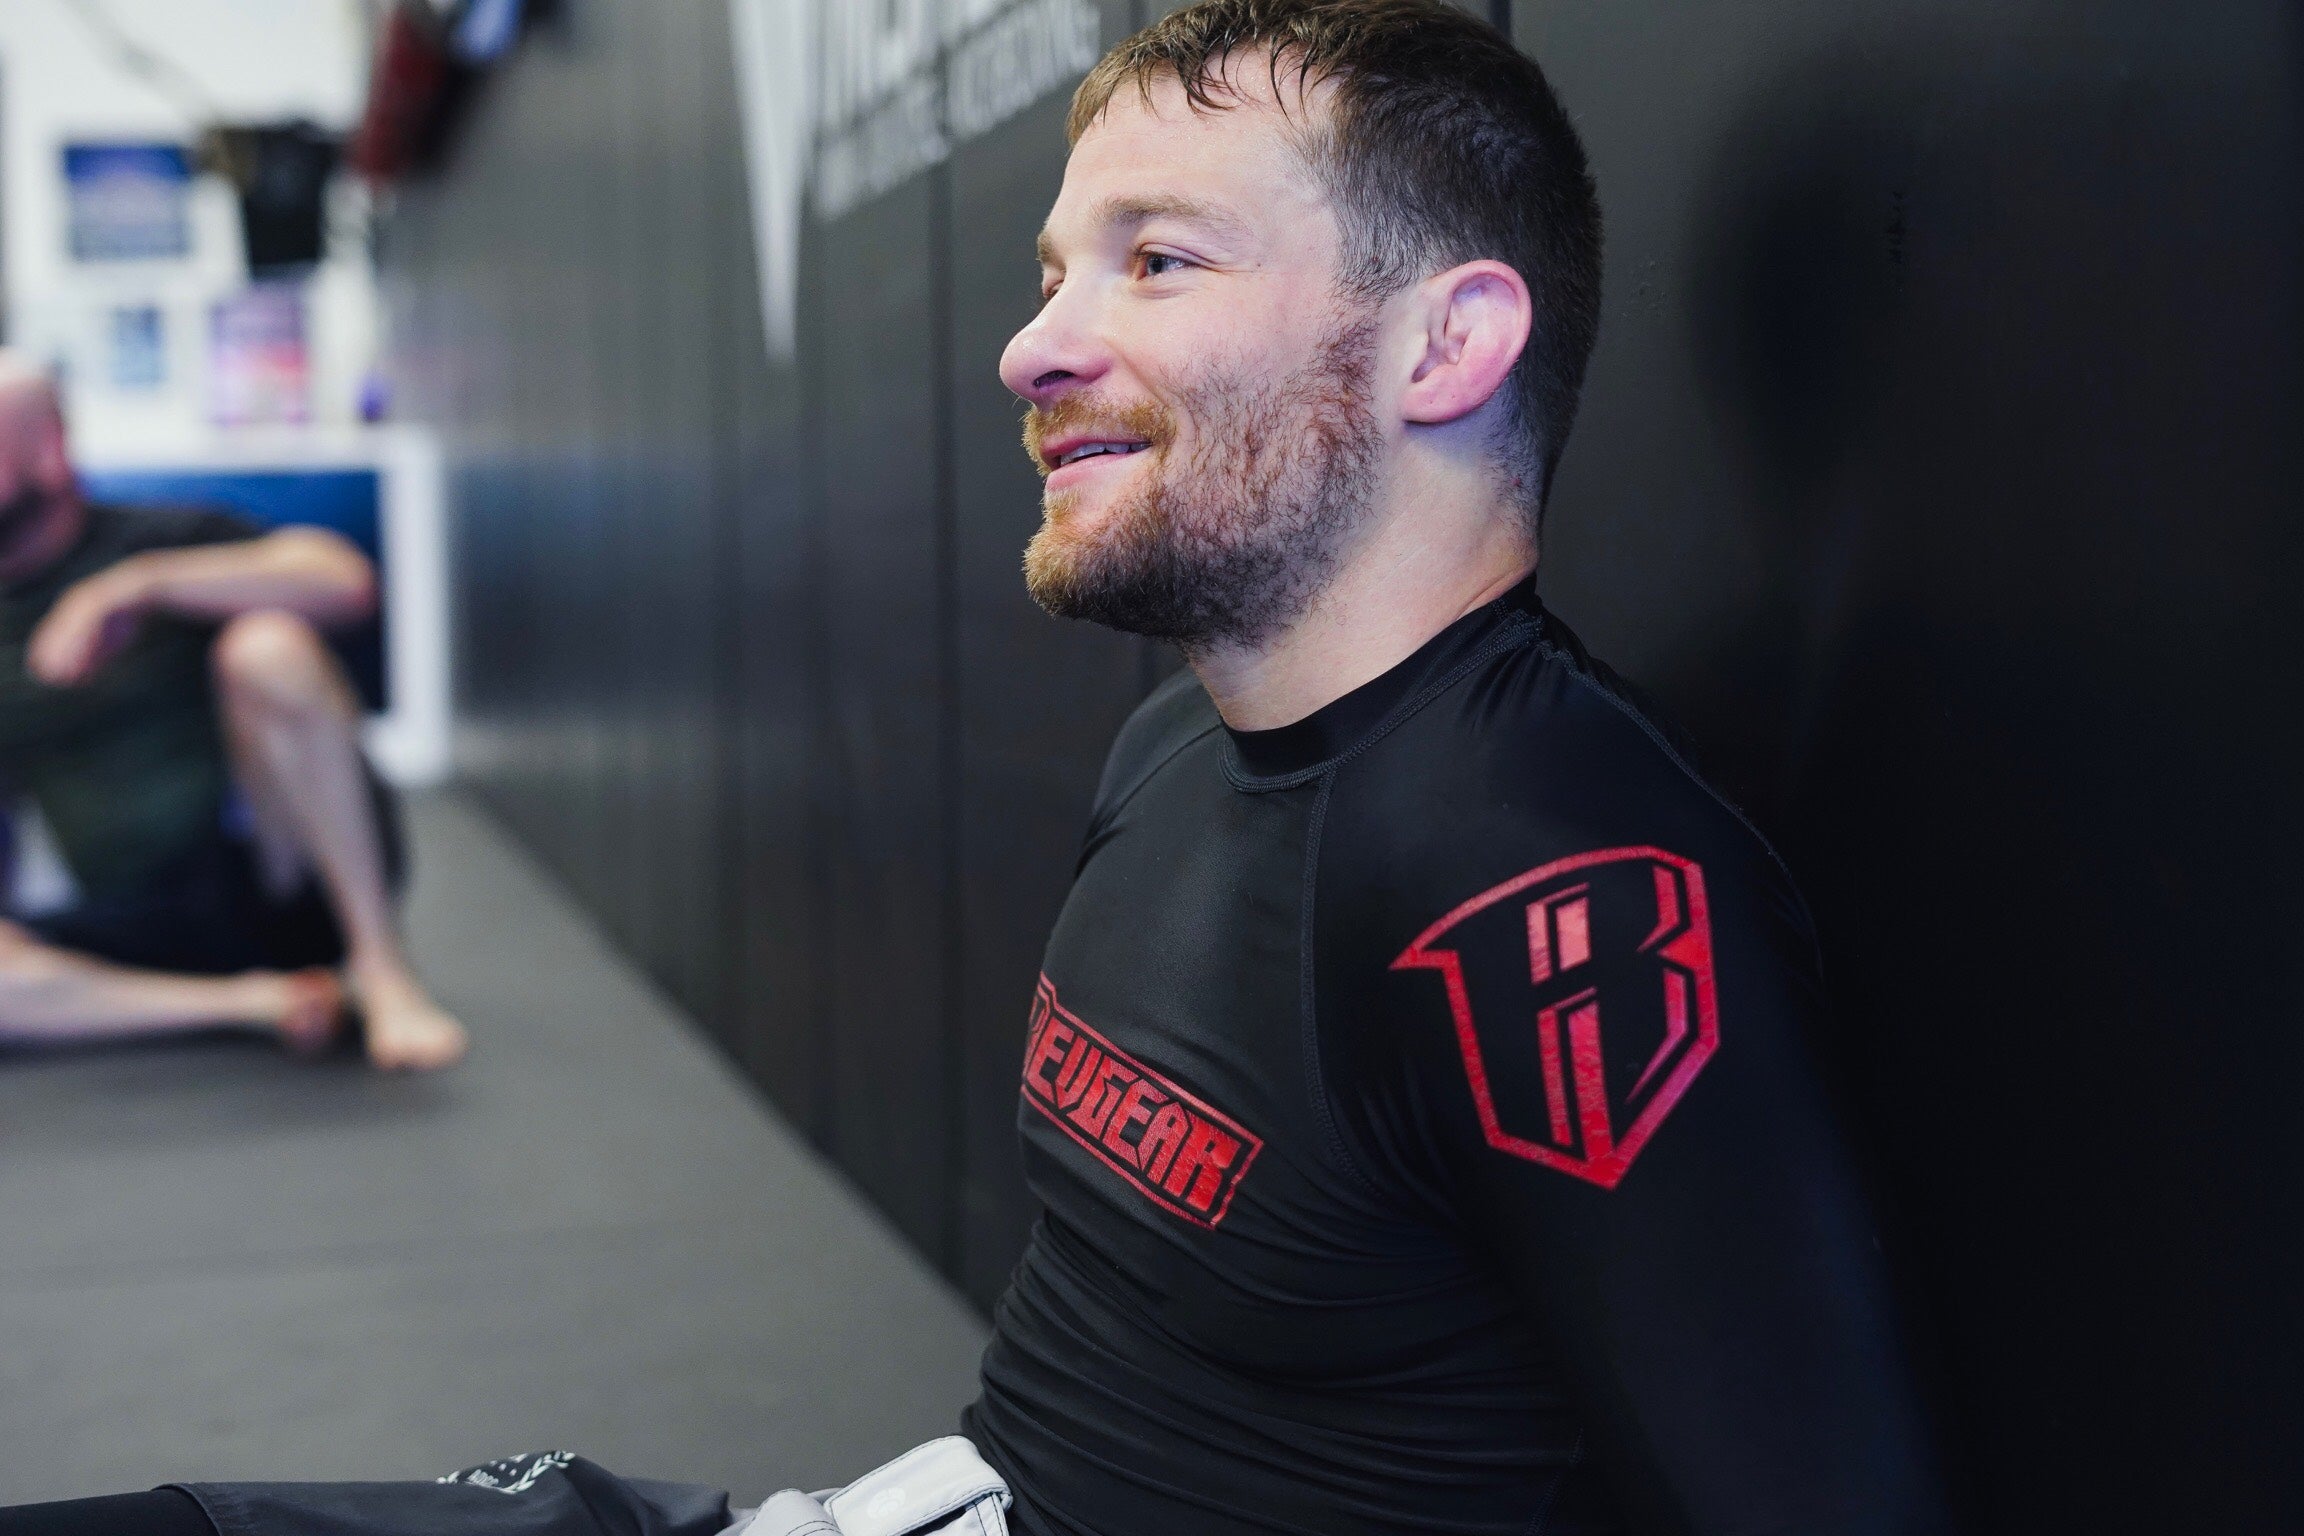 BJJ RASH GUARD - WHICH IS BEST FOR MMA OR BJJ? - FightstorePro